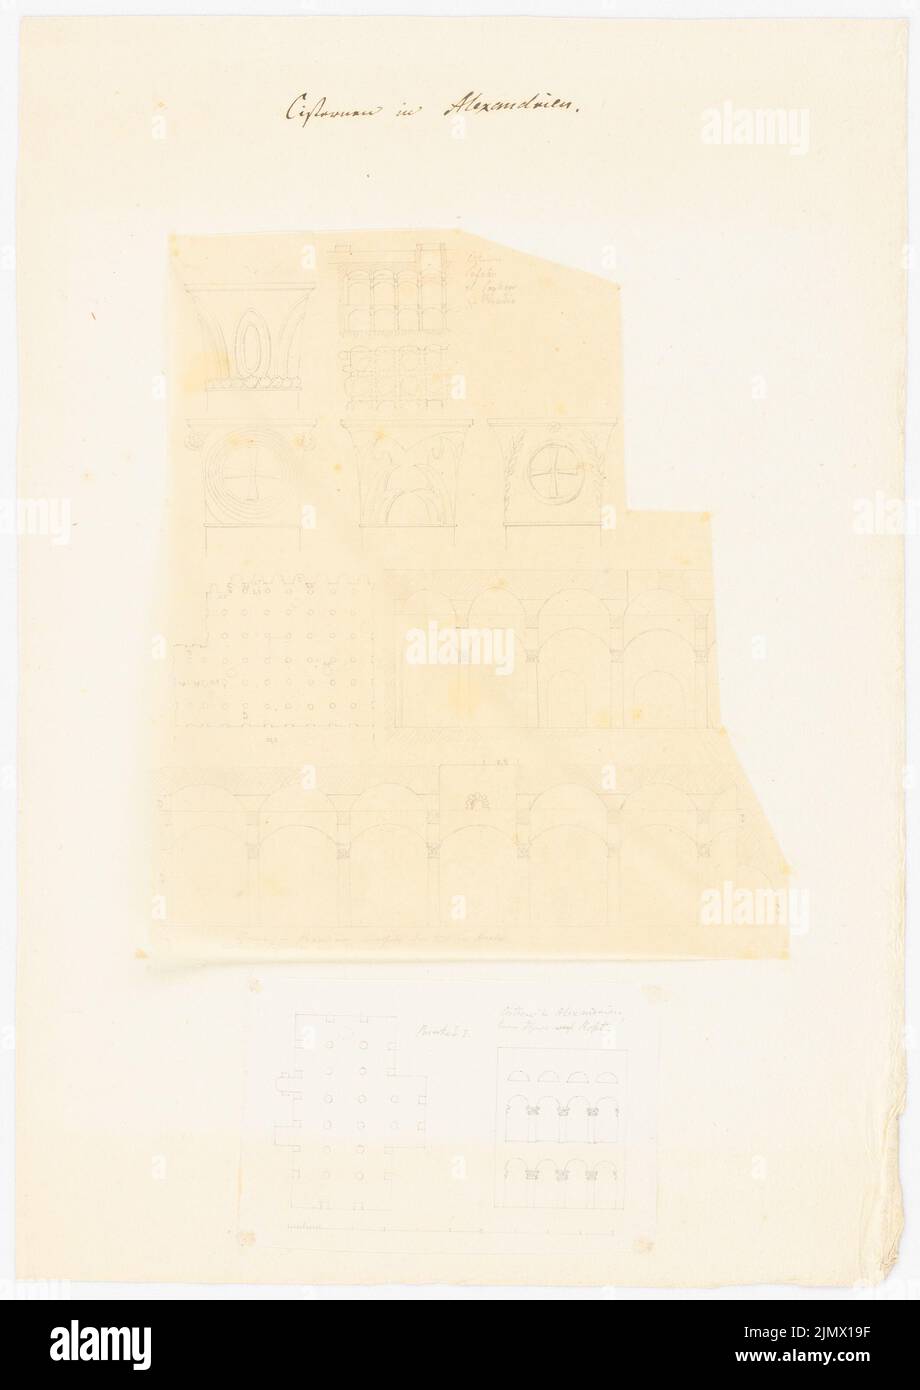 Quast Ferdinand von (1807-1877), cisterns in Alexandria (without dat.): Upper sheet: cistern within the city of the Arabs, two floor plans, three cuts, details, dimensions - lower sheet: cistern at the gate to ro. Pencil on transparent , Pencil on paper, 35.1 x 24.8 cm (including scan edges) Quast Ferdinand von  (1807-1877): Zisternen, Alexandria Stock Photo